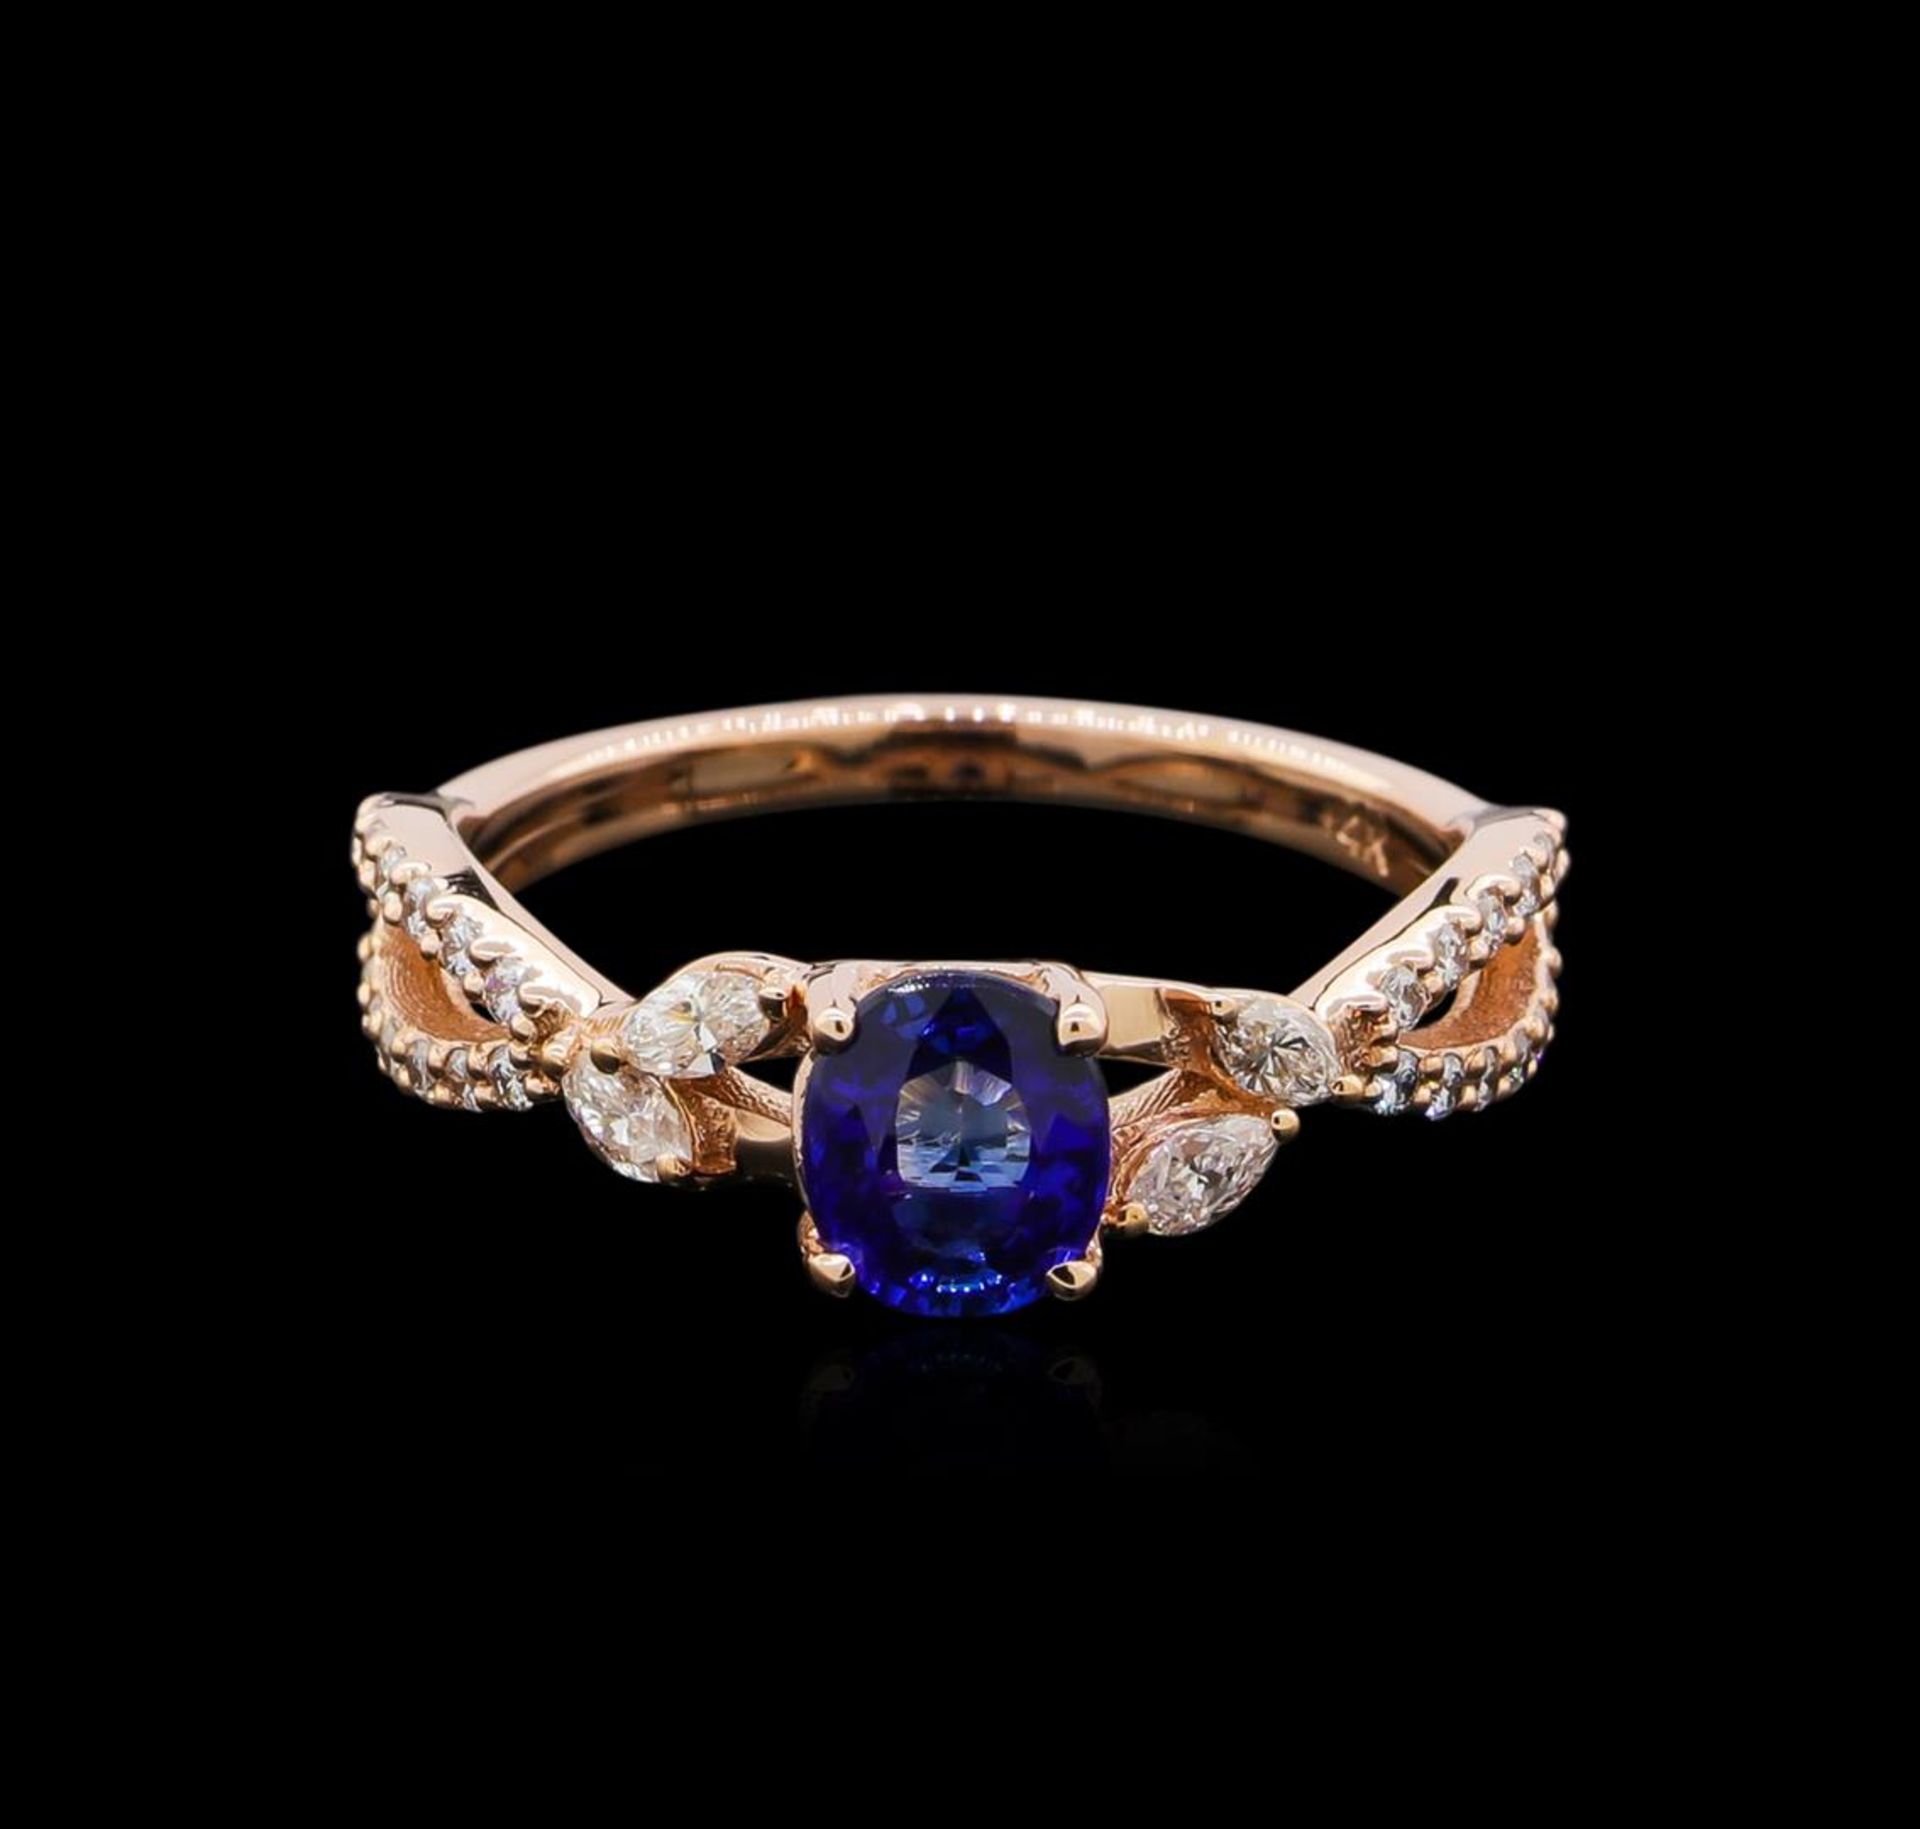 0.71 ctw Sapphire and Diamond Ring - 14KT Rose Gold - Image 2 of 4